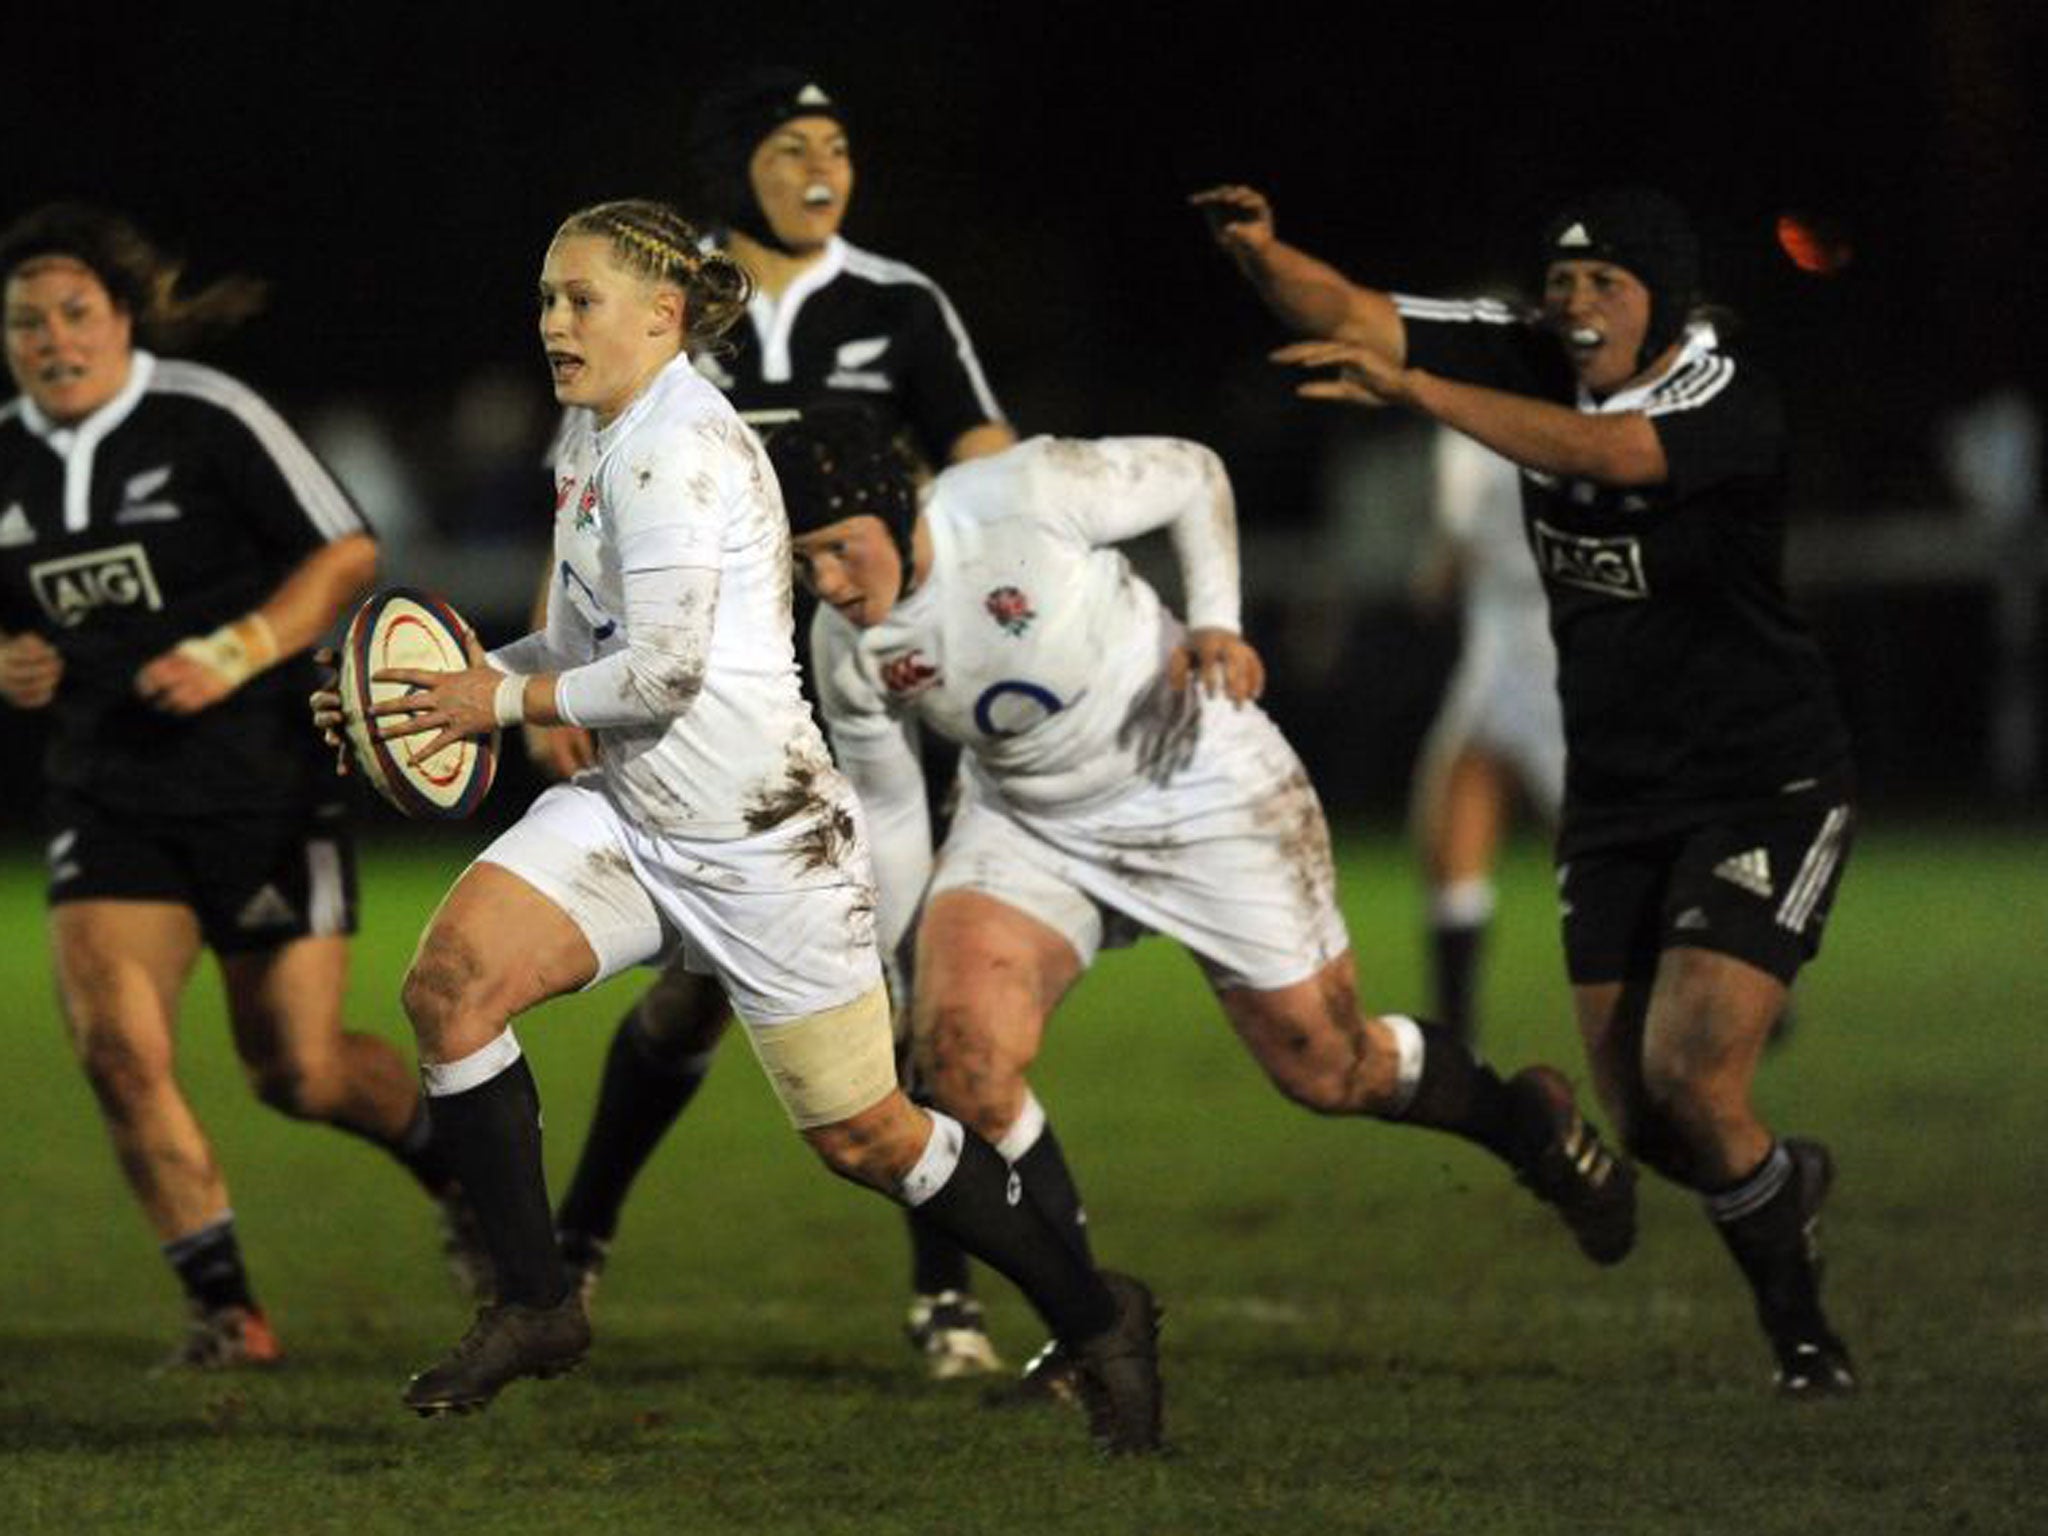 England’s Francesca Matthews charges through the New Zealand women’s defence in the 17-8 victory earlier this week